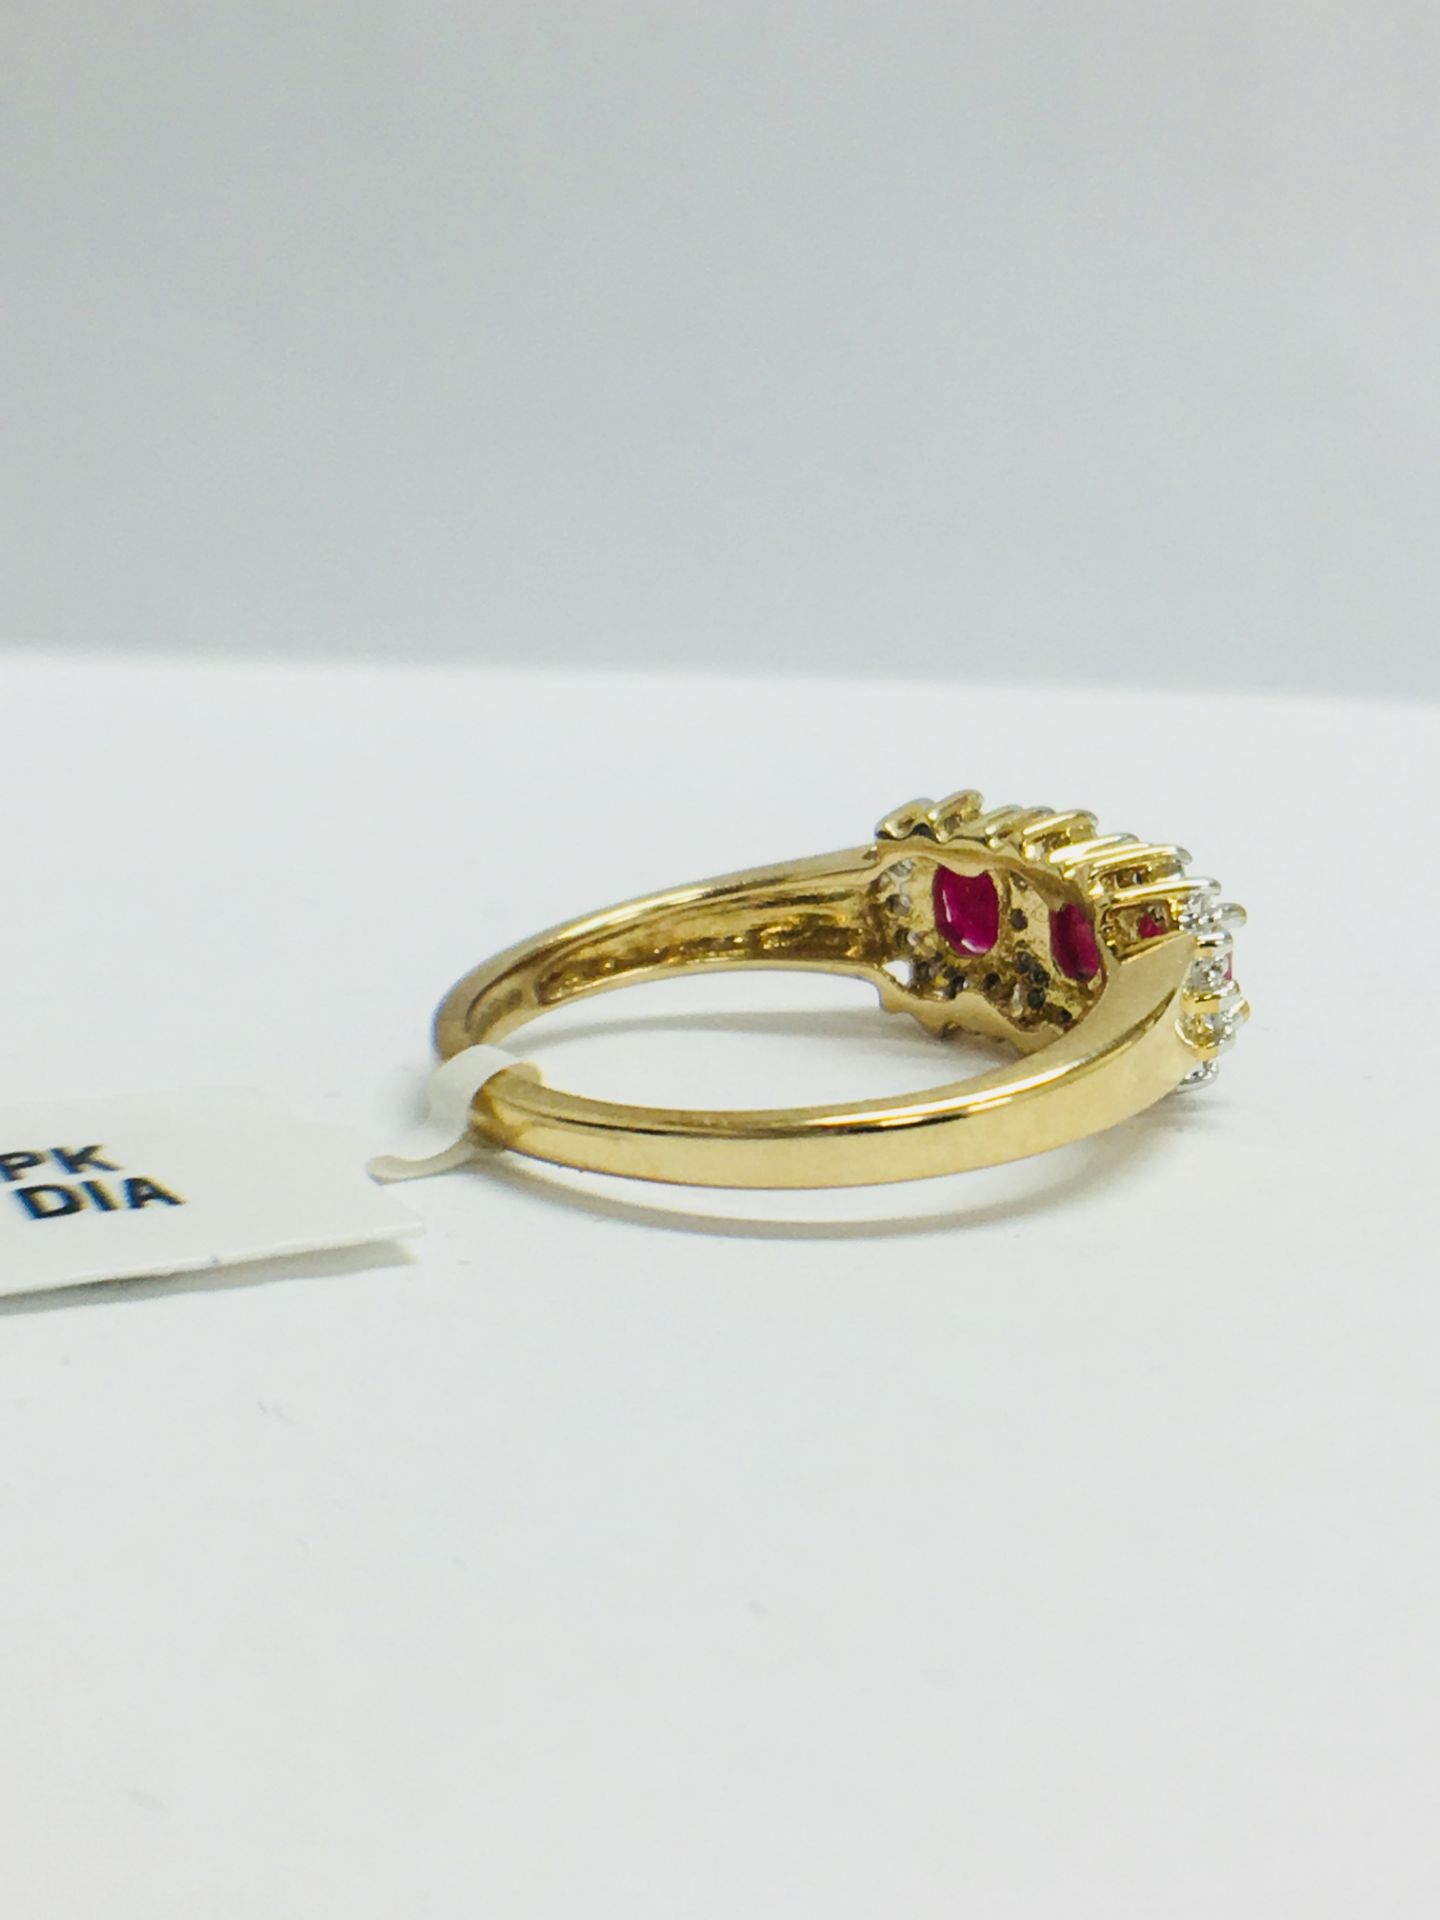 9ct Ruby Diamond Cluster Style Ring - Image 6 of 12